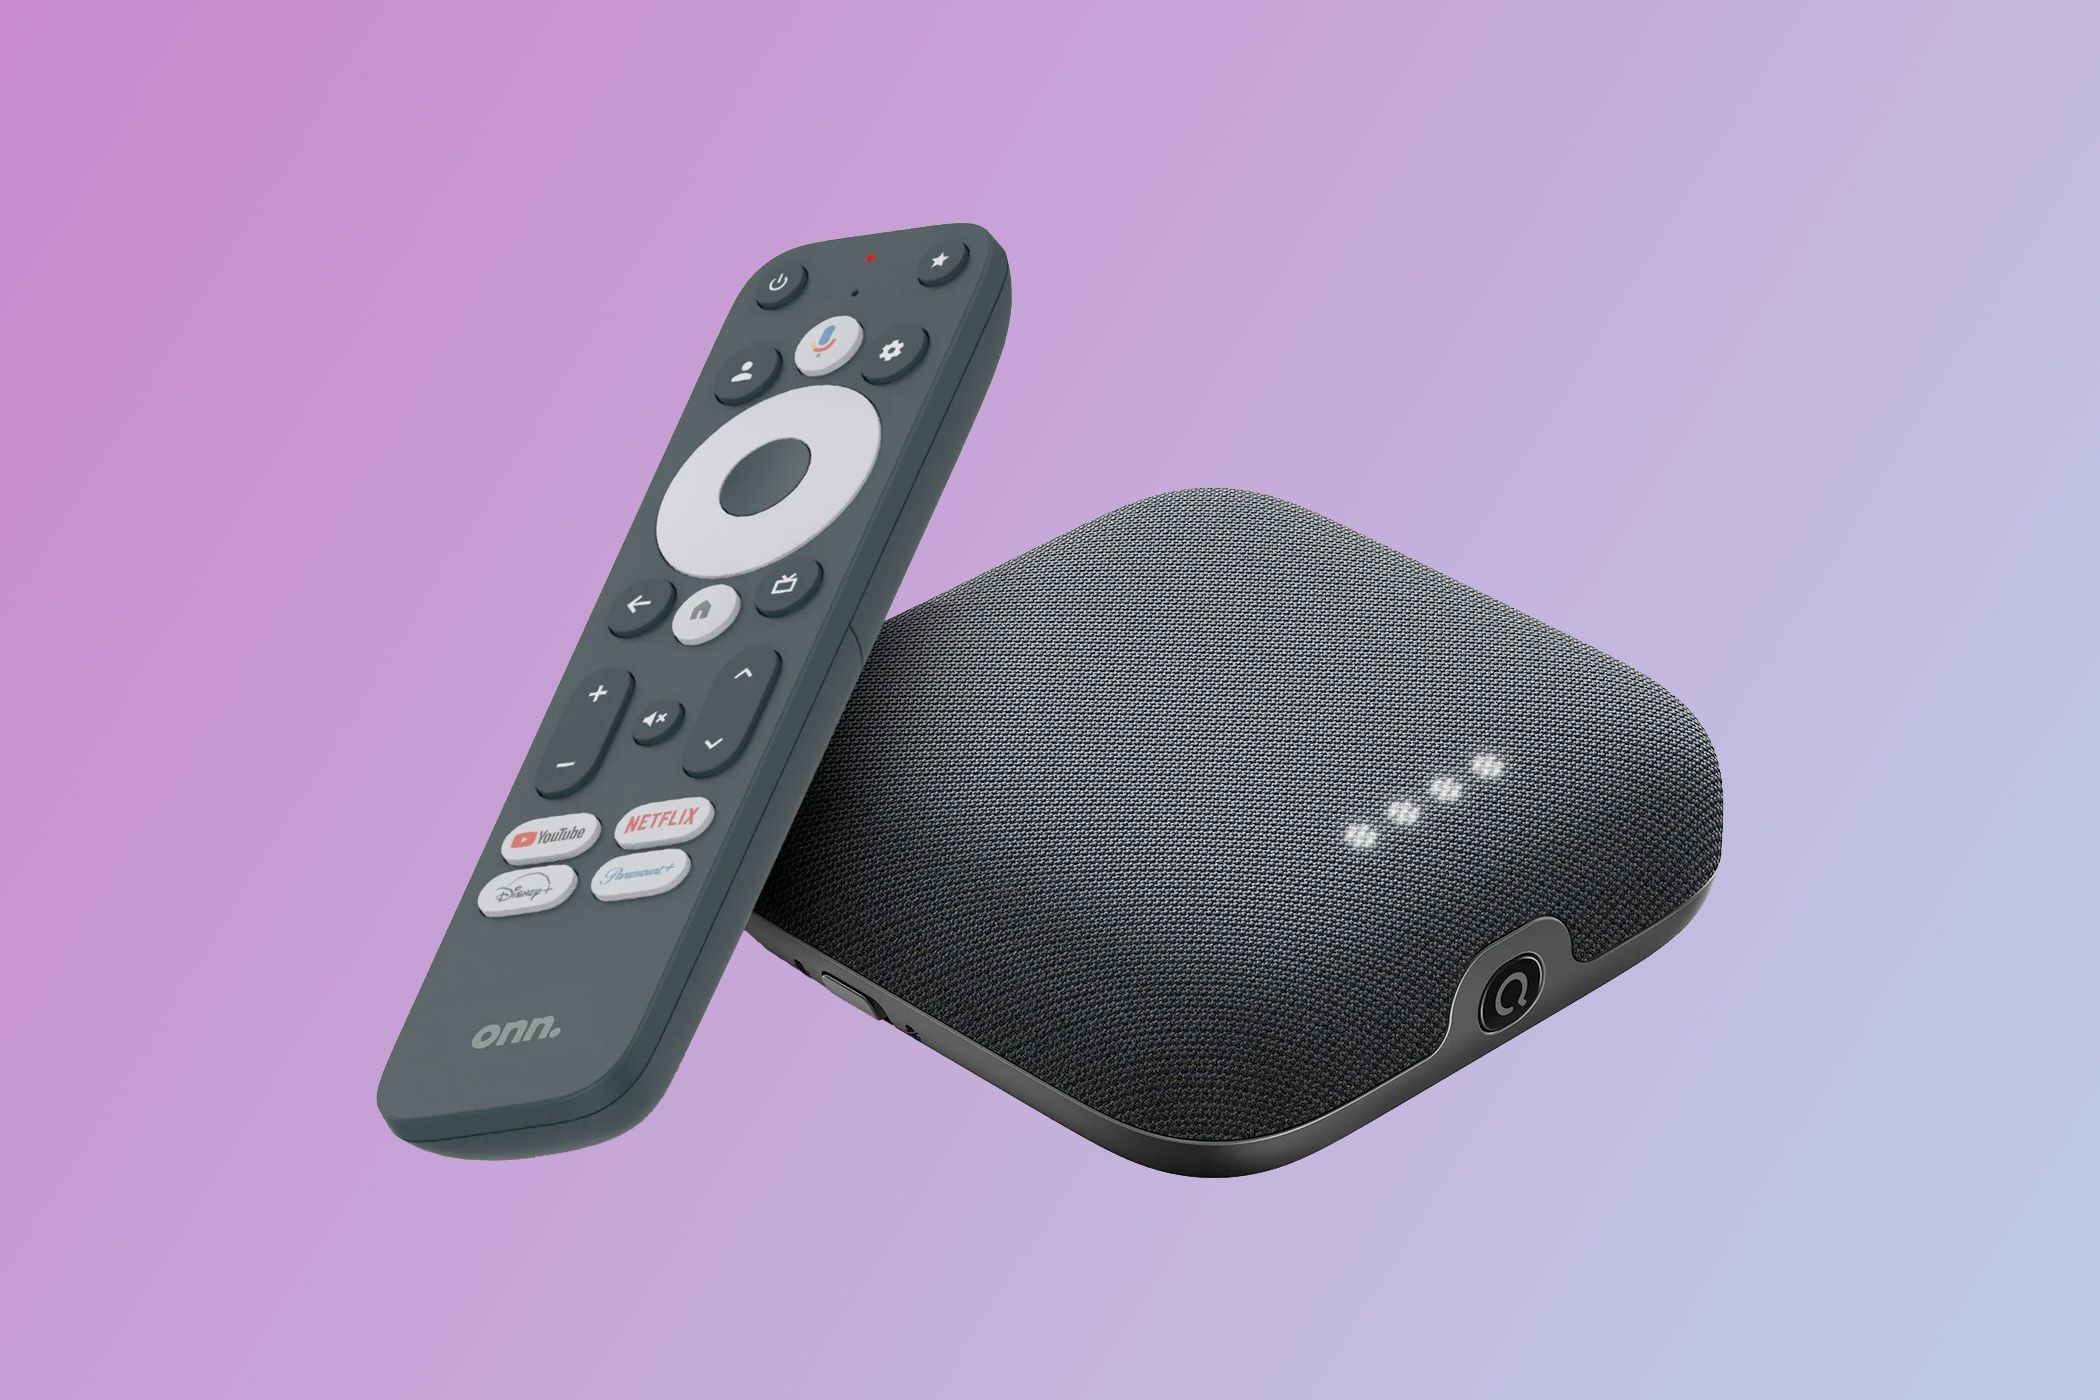 Streaming device and remote control